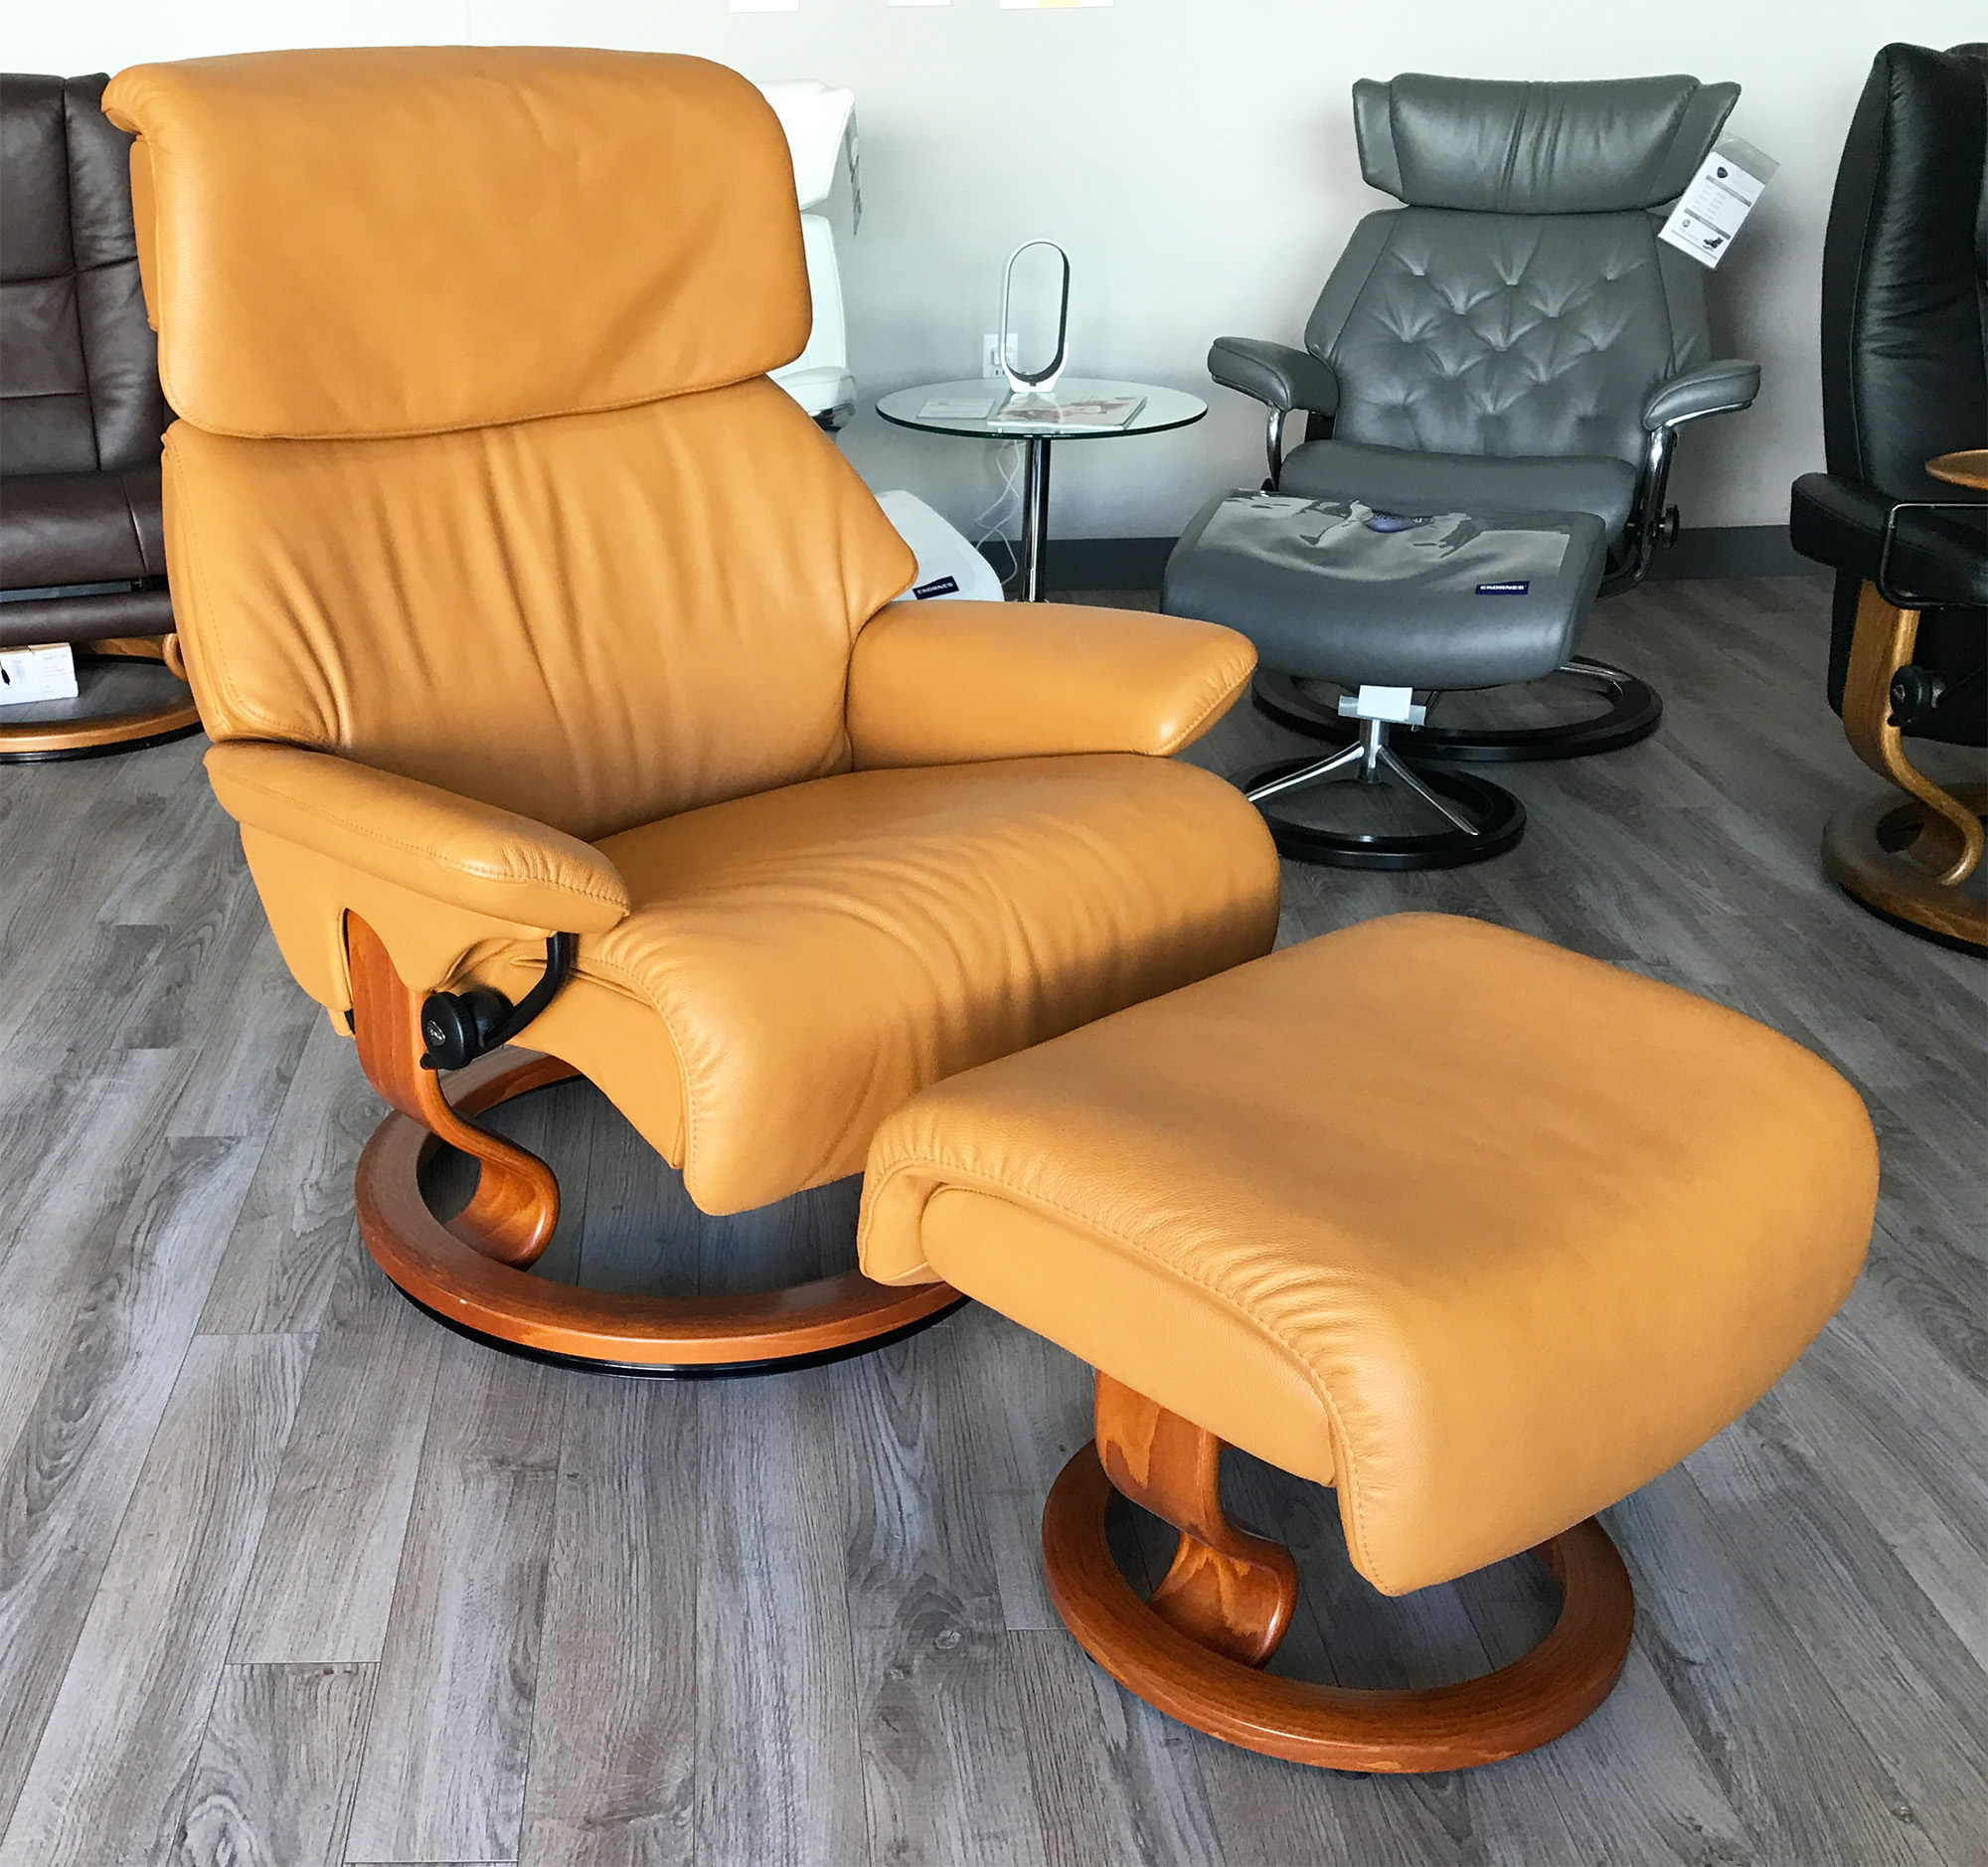 Stressless Spirit Large Dream Cori Chairs Large Stressless Spirit Cori Chair Tan Tan - Recliner Leather by Ottoman Recliners Leather Dream and Ekornes